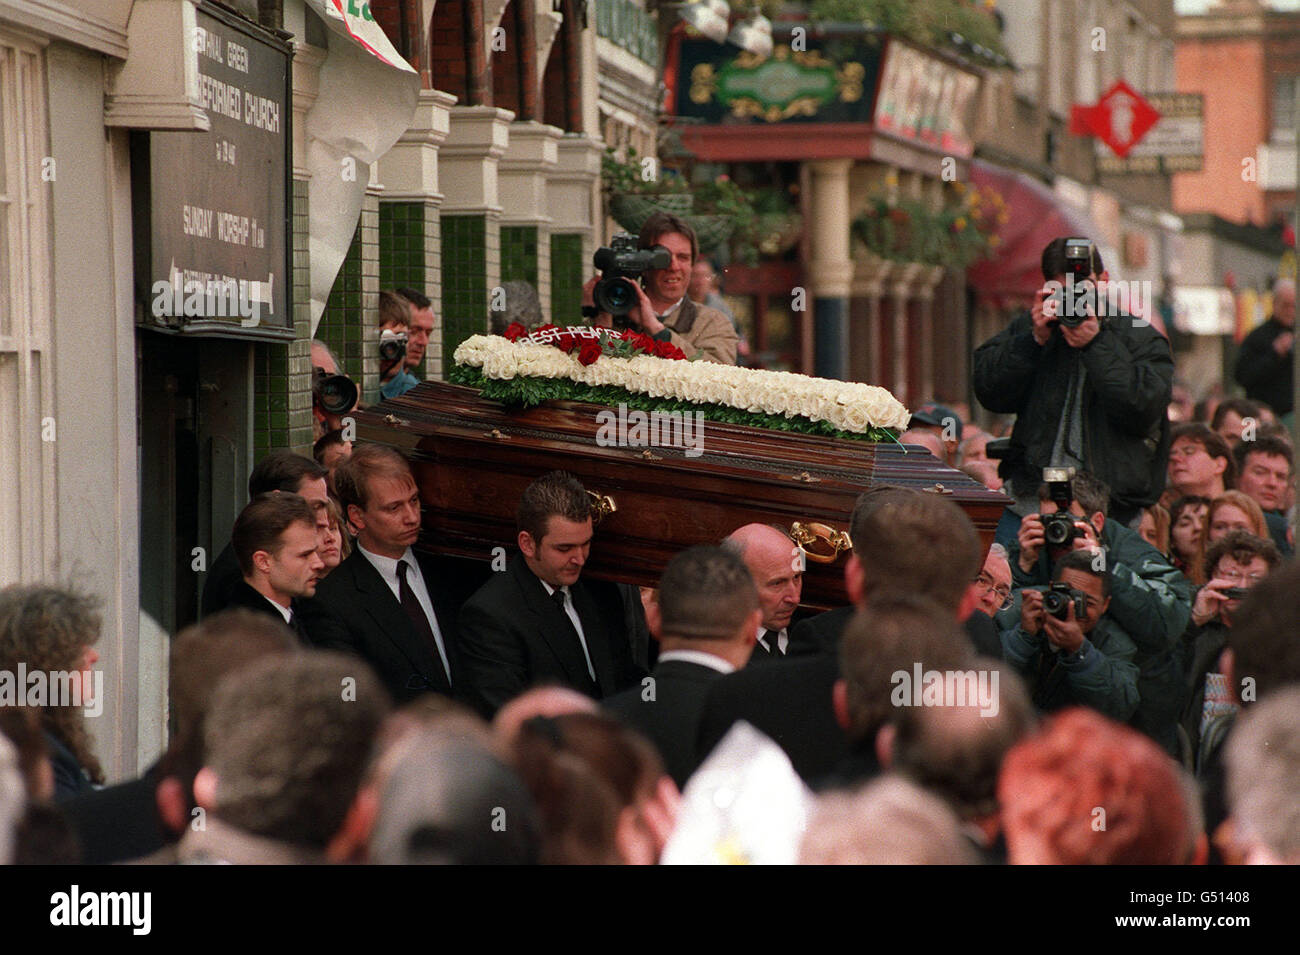 The coffin containing former gangster Ronnie Kray is taken from the funeral parlour in Betnal Green before the cortage left for St. Matthew's church and burial at Chingford Mount Cemetary. Stock Photo